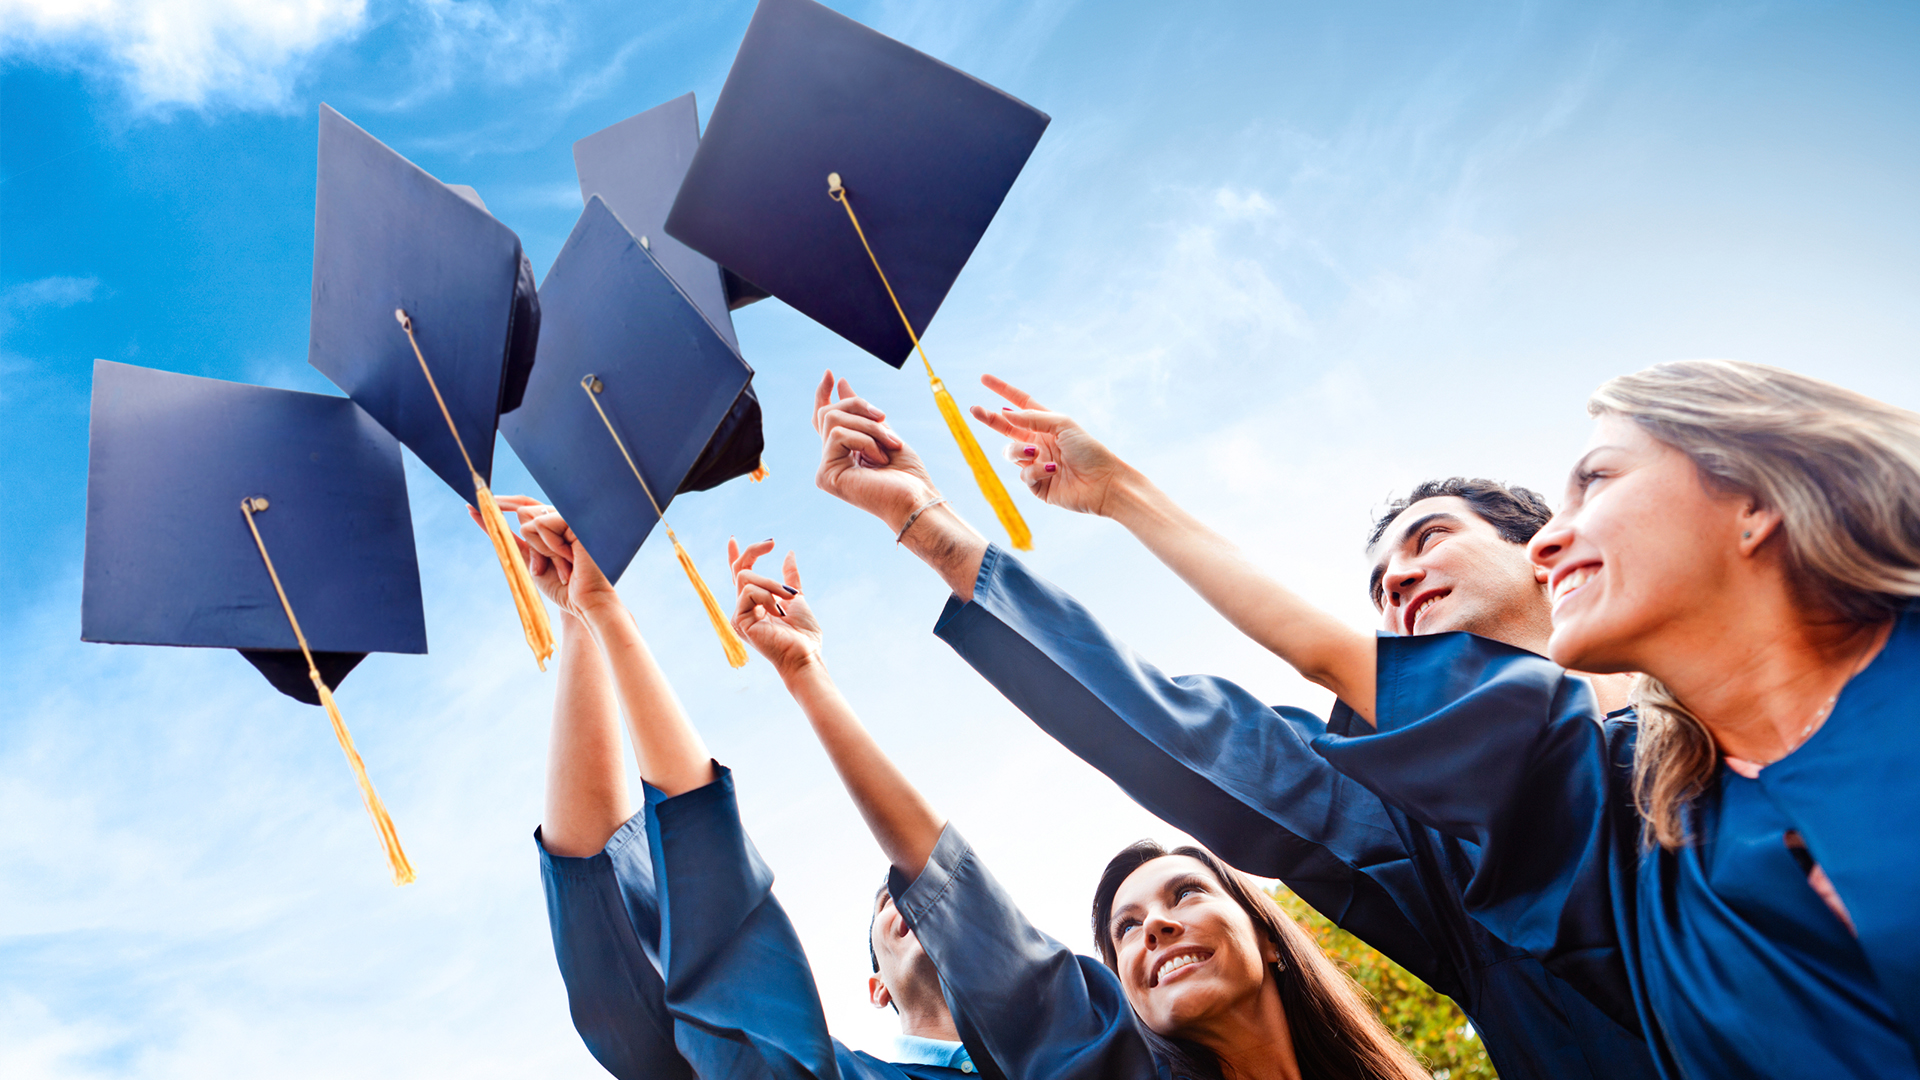 How To Optimize Your Space on Graduation Day